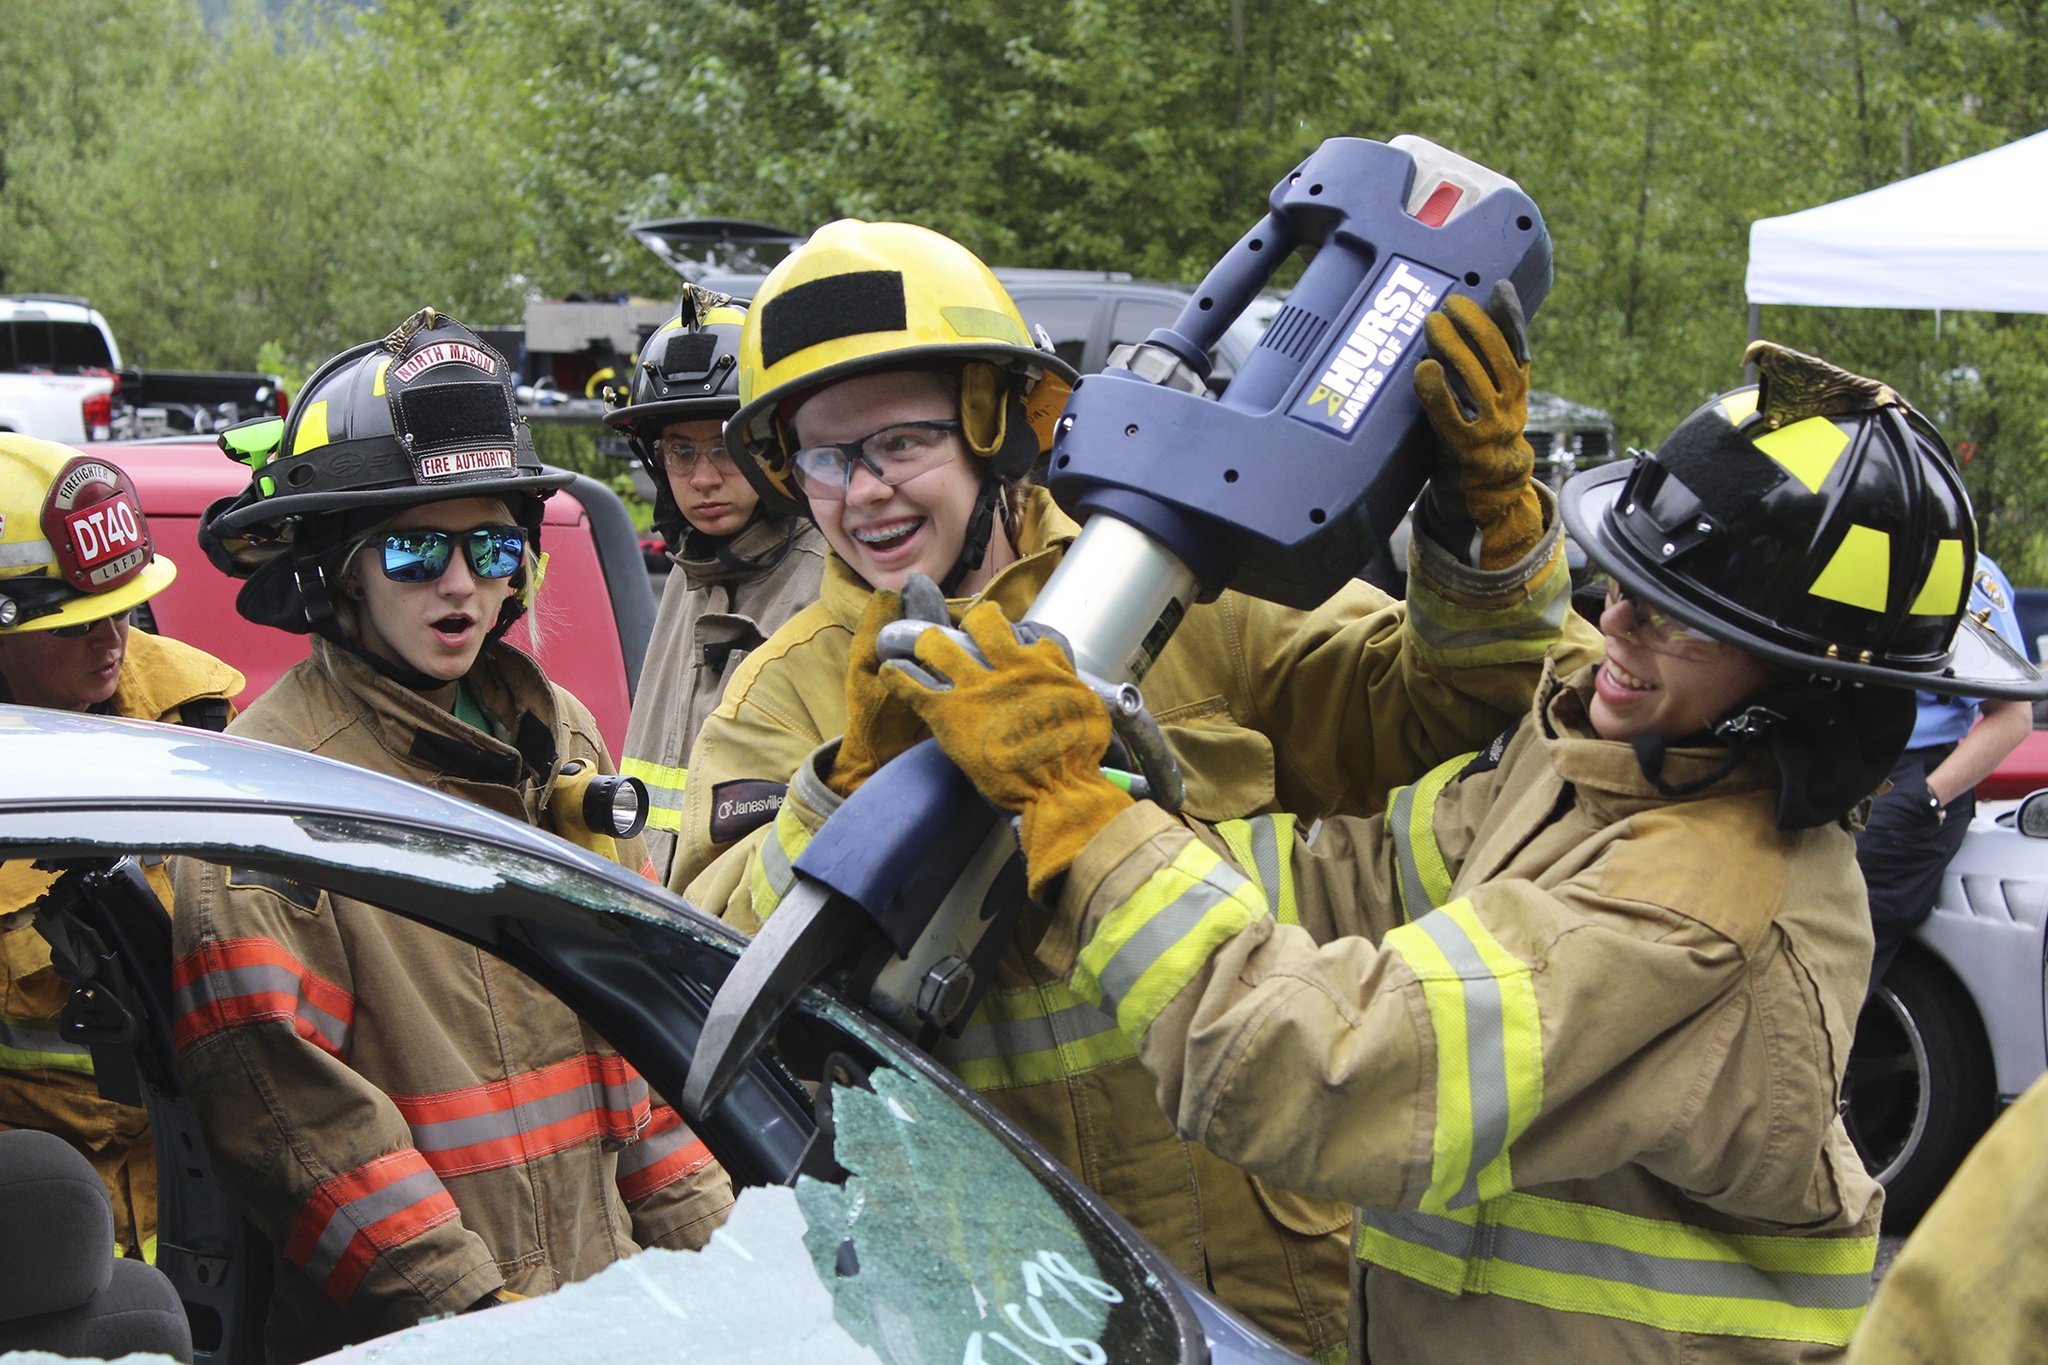 Women from around the Eastside train with the jaws of life during a firefighting camp in Bellevue. Allison DeAngelis/Bellevue Reporter